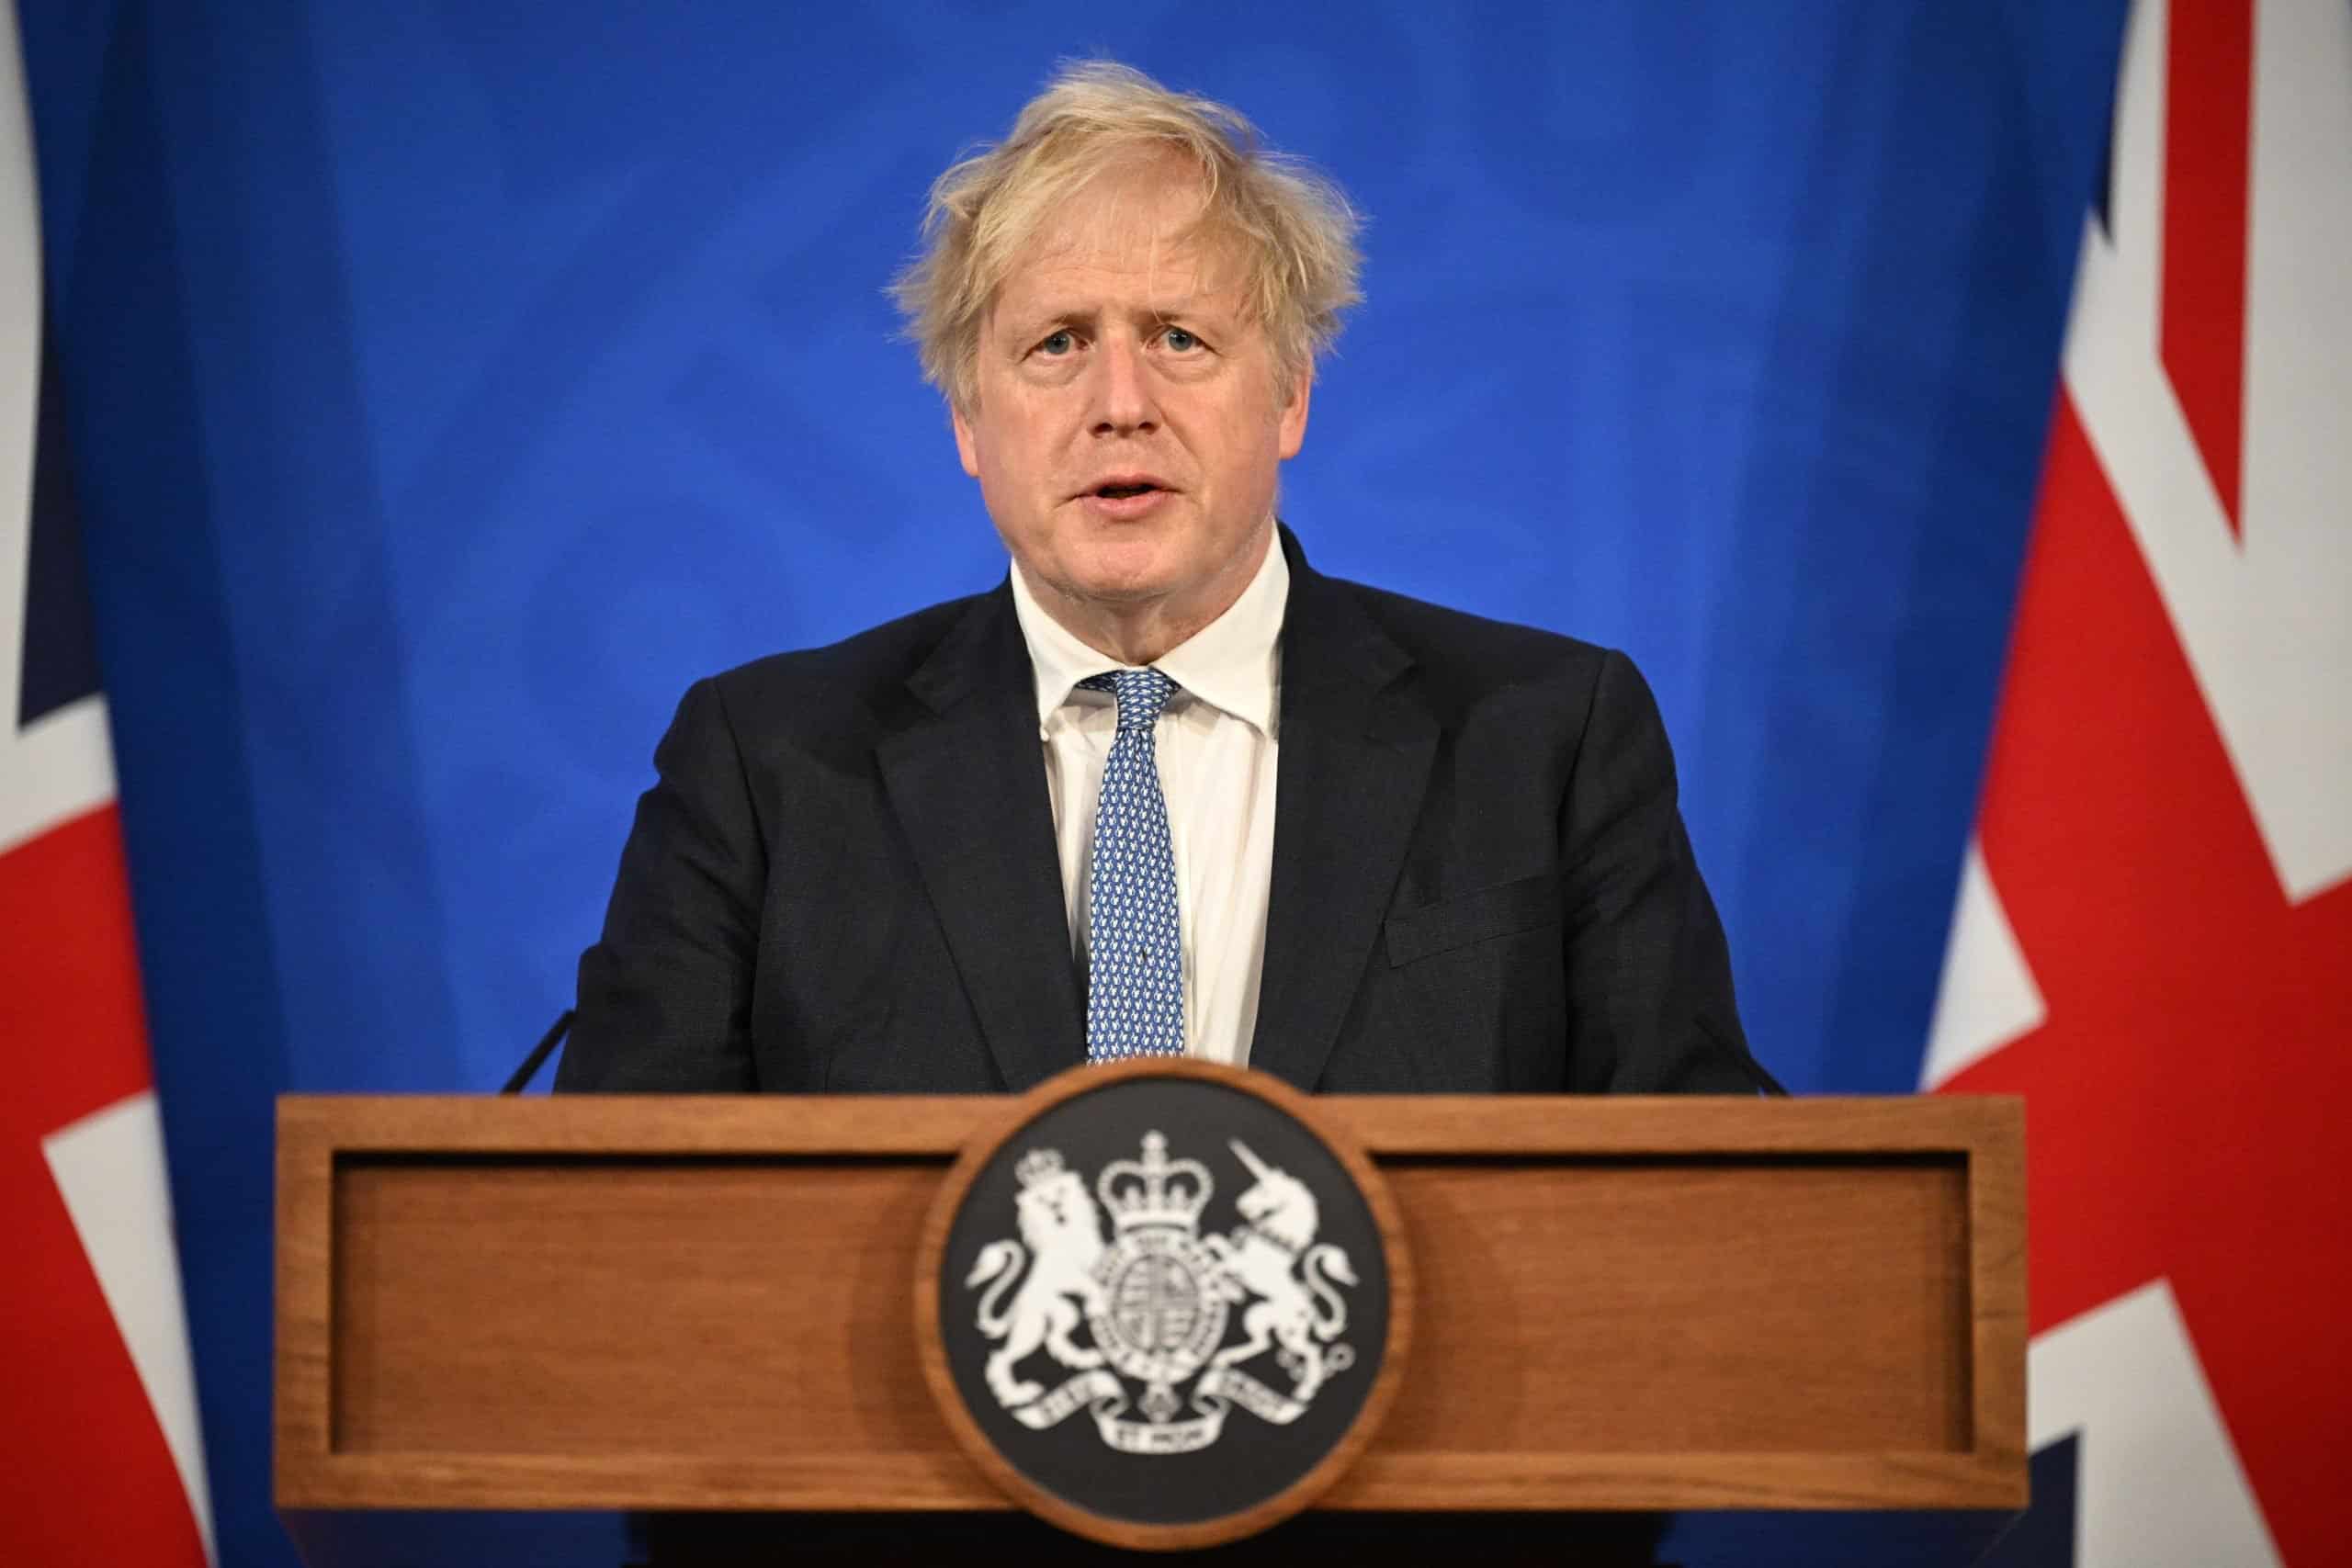 Johnson will not undergo a ‘psychological transformation’ as pressure piles on